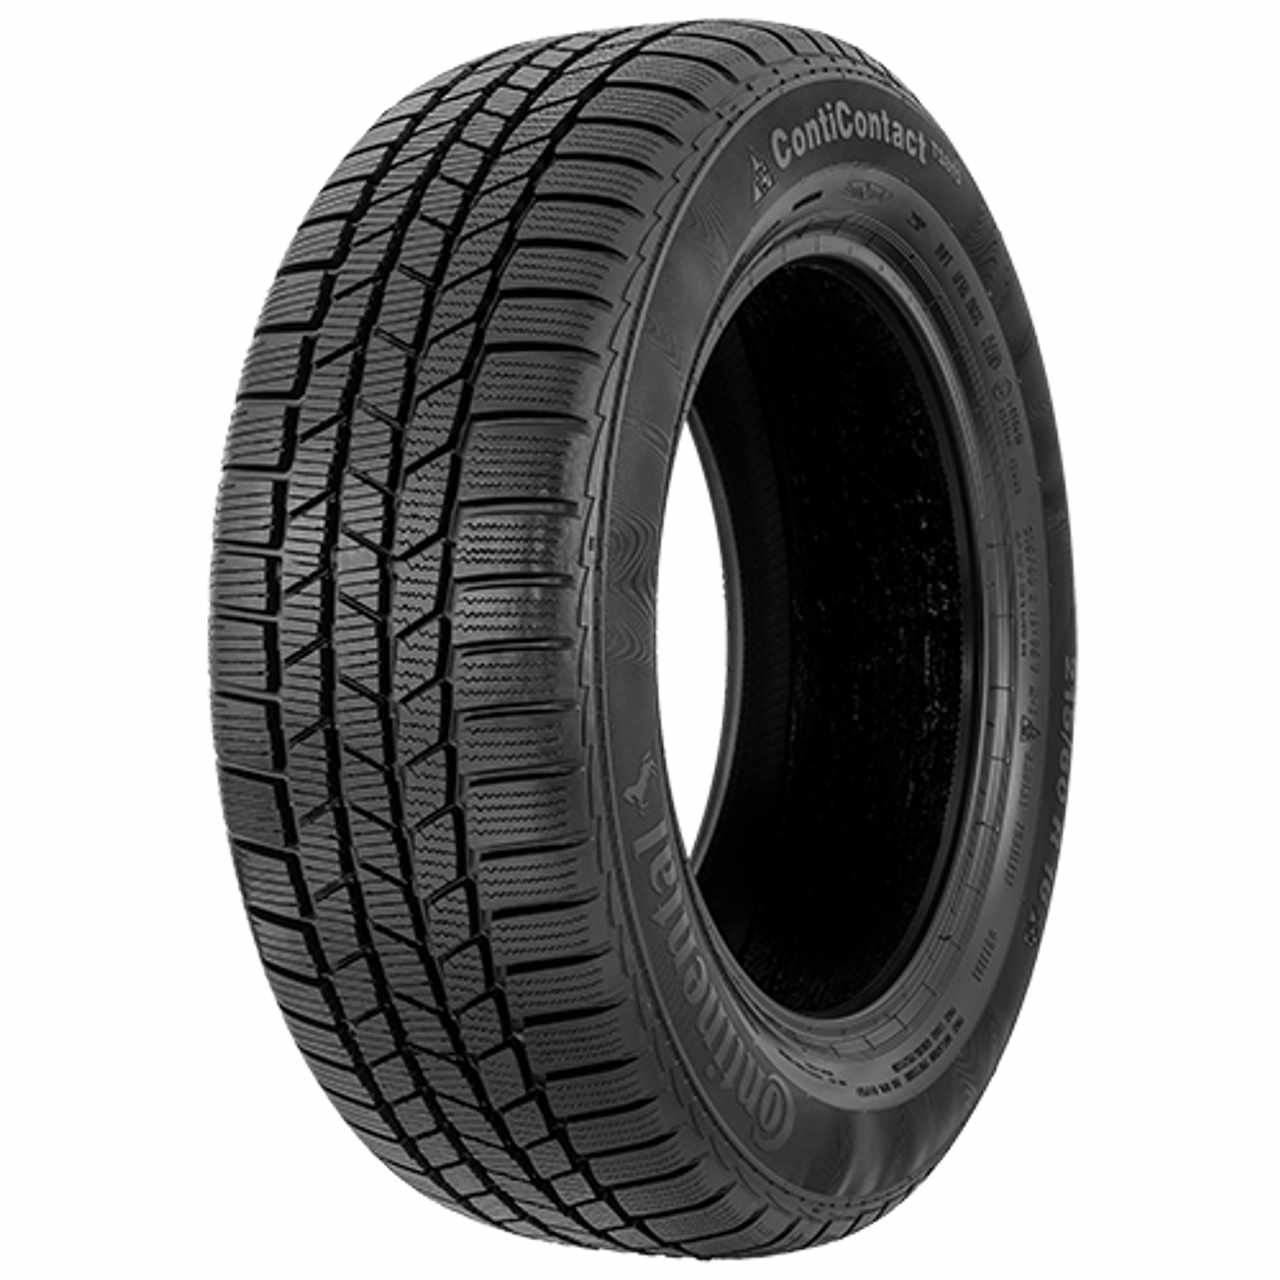 CONTINENTAL CONTICONTACT TS 815 205/60R16 96H BSW XL